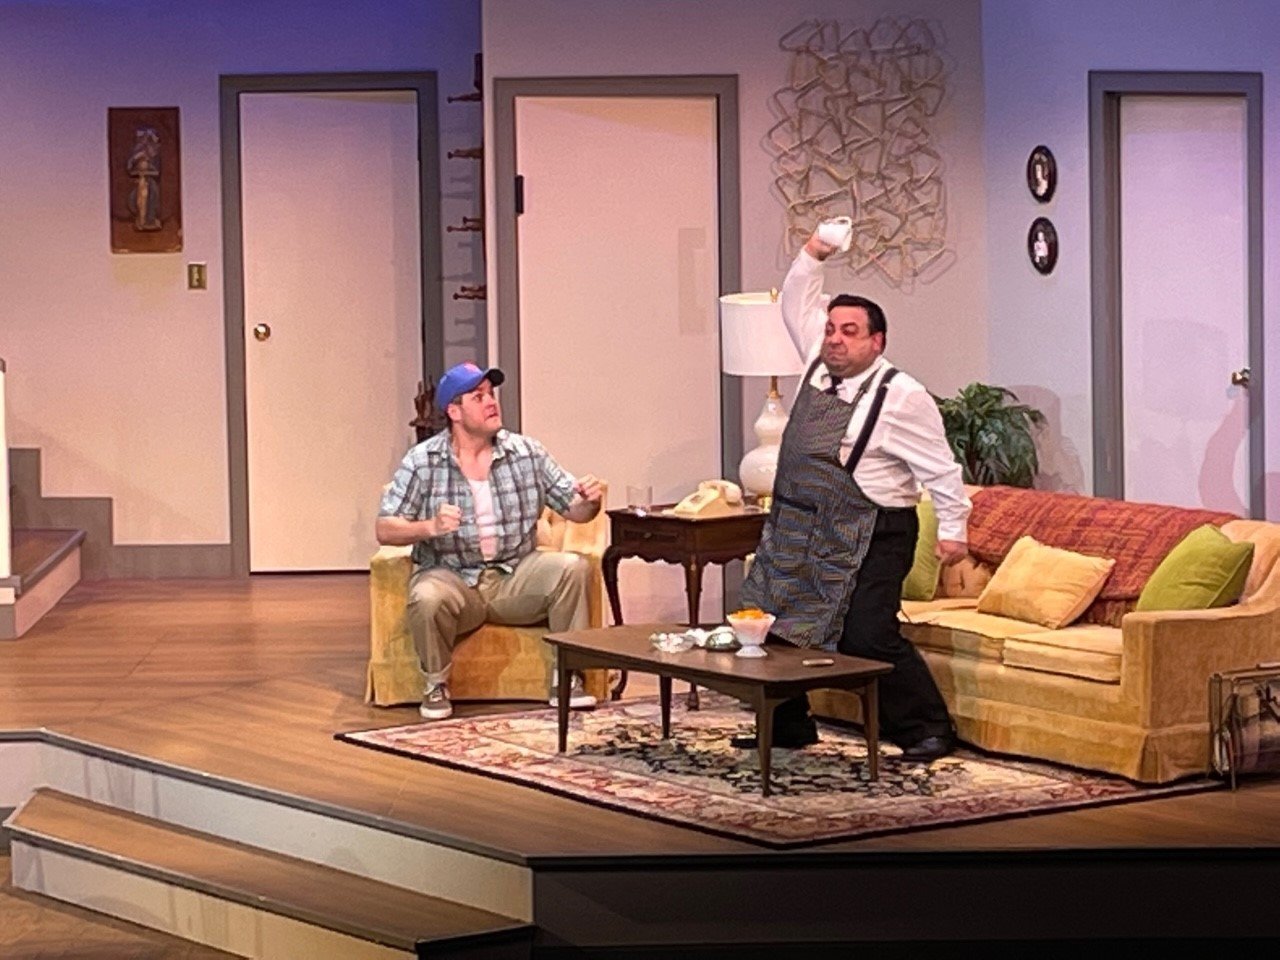 Oscar, left, played by Jonathan Judge-Russo, encourages Felix, played by Marc de la Concha, to let out his emotions and throw the cup.'The Odd Couple' continues at Cape Fear Regional Theatre through Nov. 13.